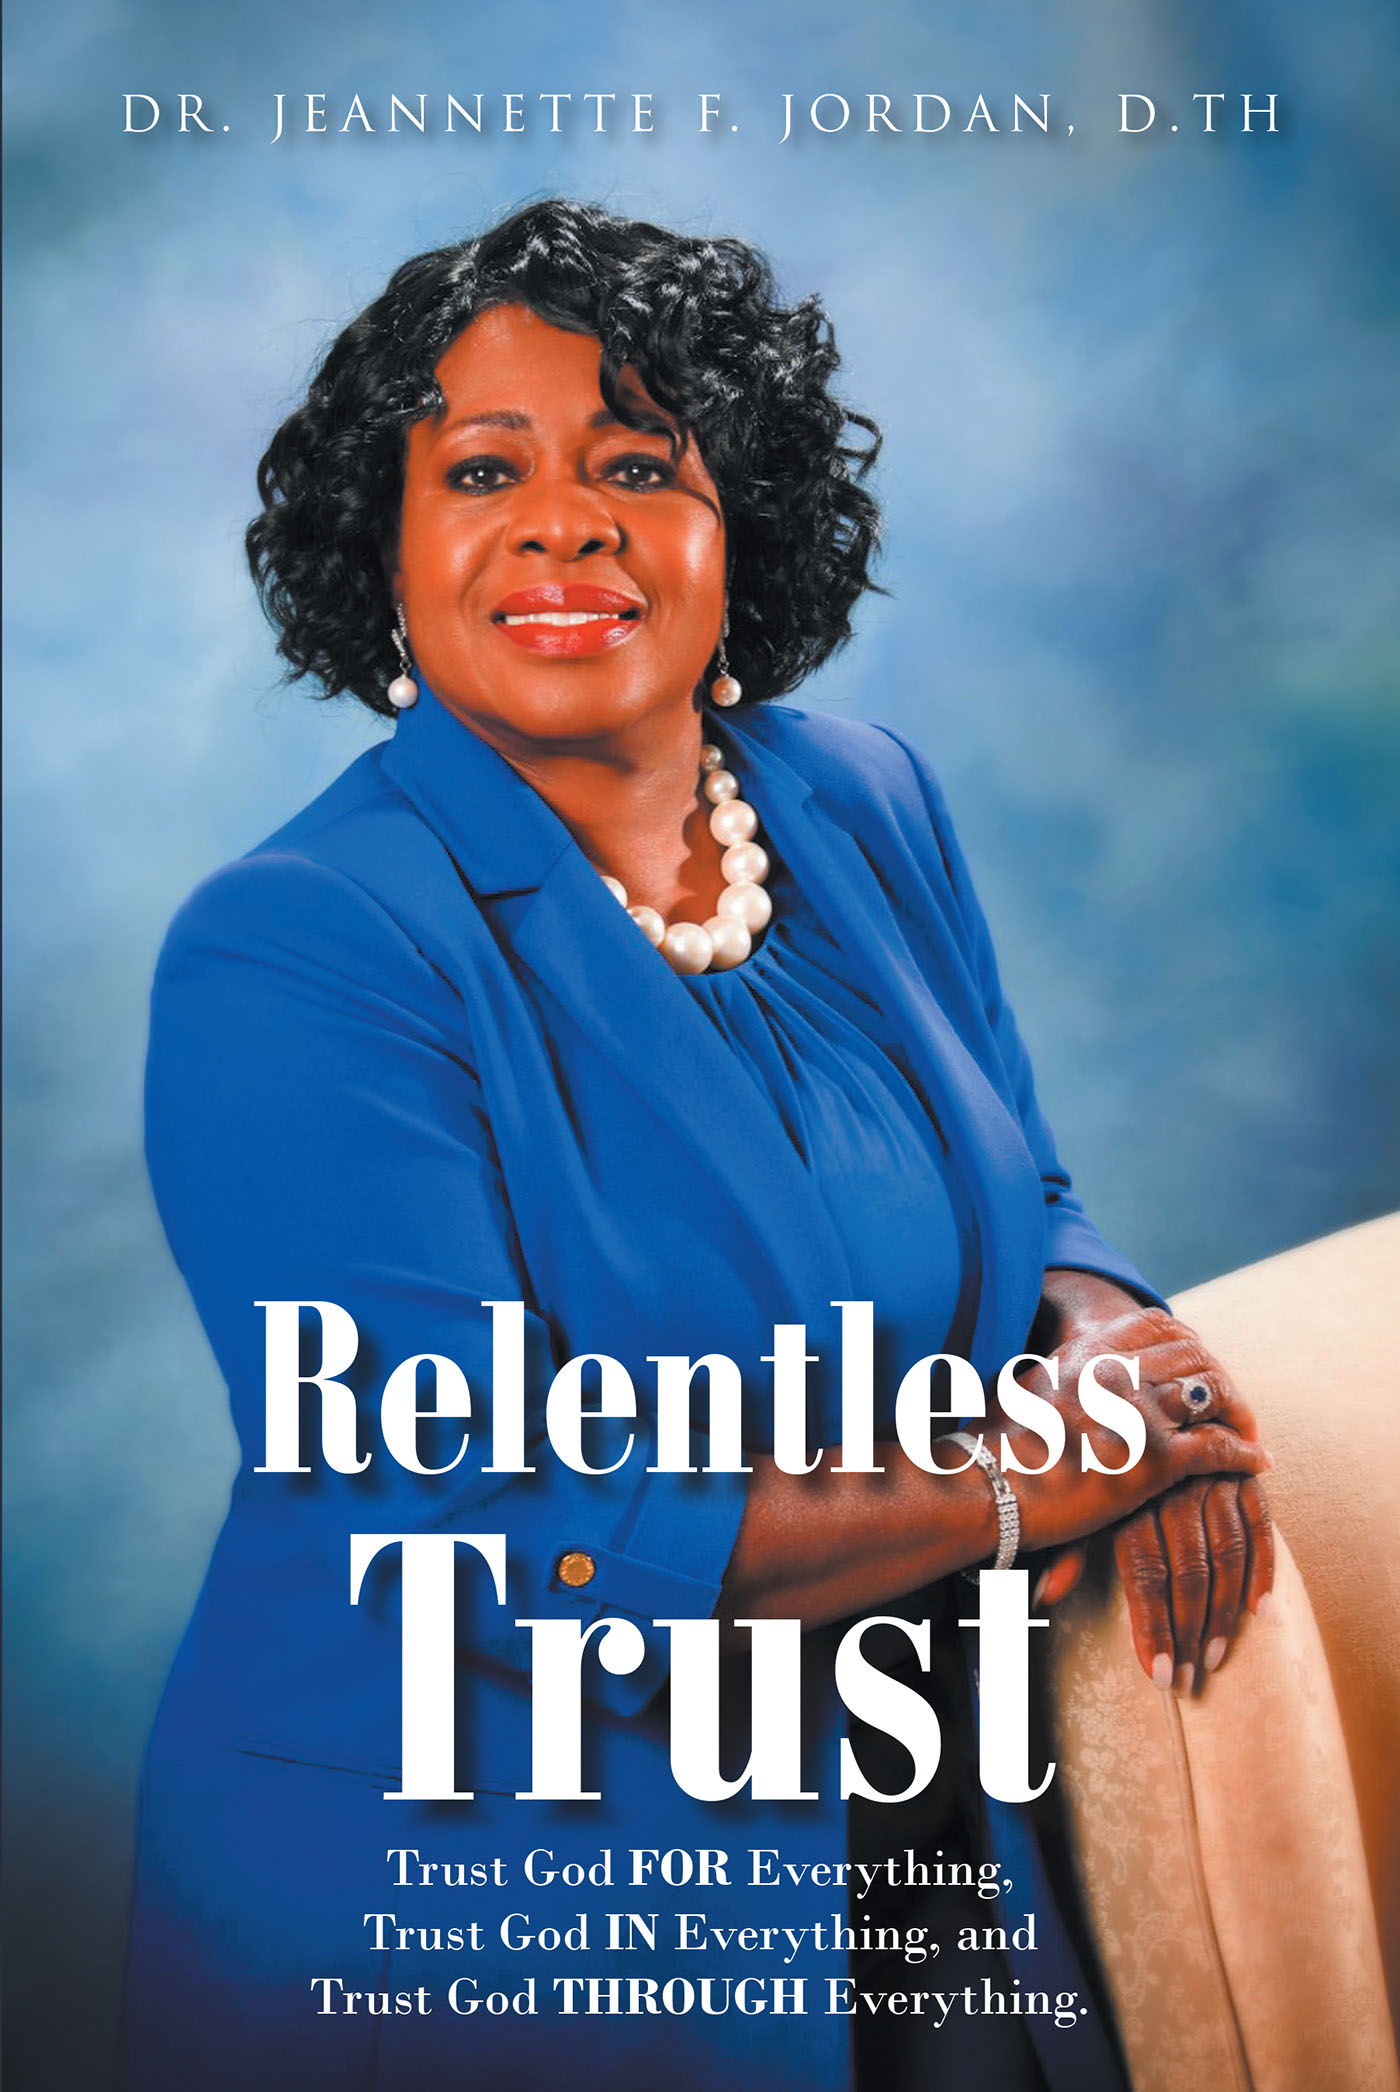 Dr. Jeannette F. Jordan, D.TH’s Newly Released “Relentless Trust” is an Encouraging Devotional That Motivates Readers to Always Turn to God